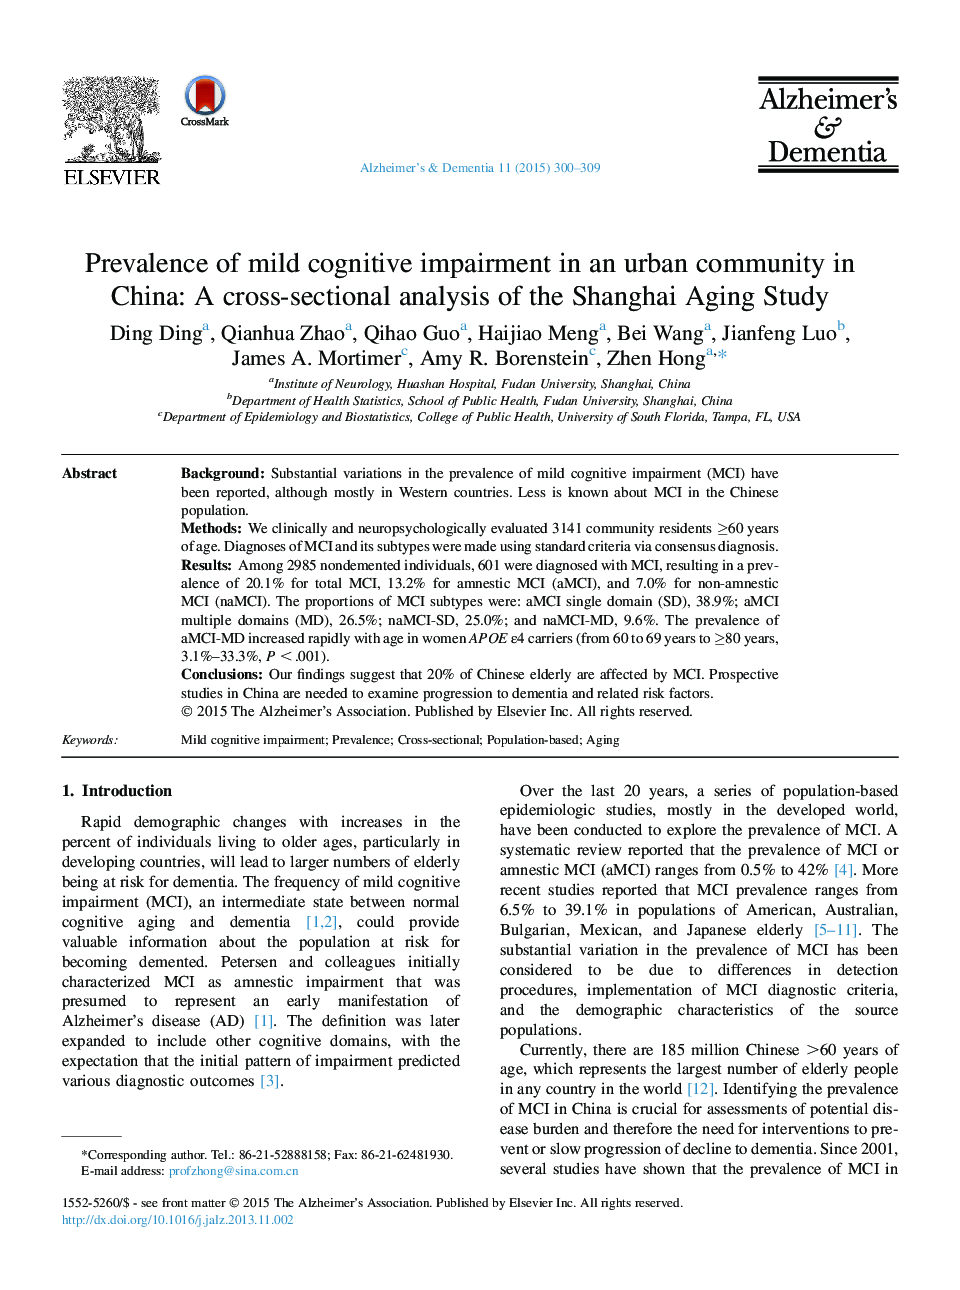 Featured ArticlePrevalence of mild cognitive impairment in an urban community in China: A cross-sectional analysis of the Shanghai Aging Study